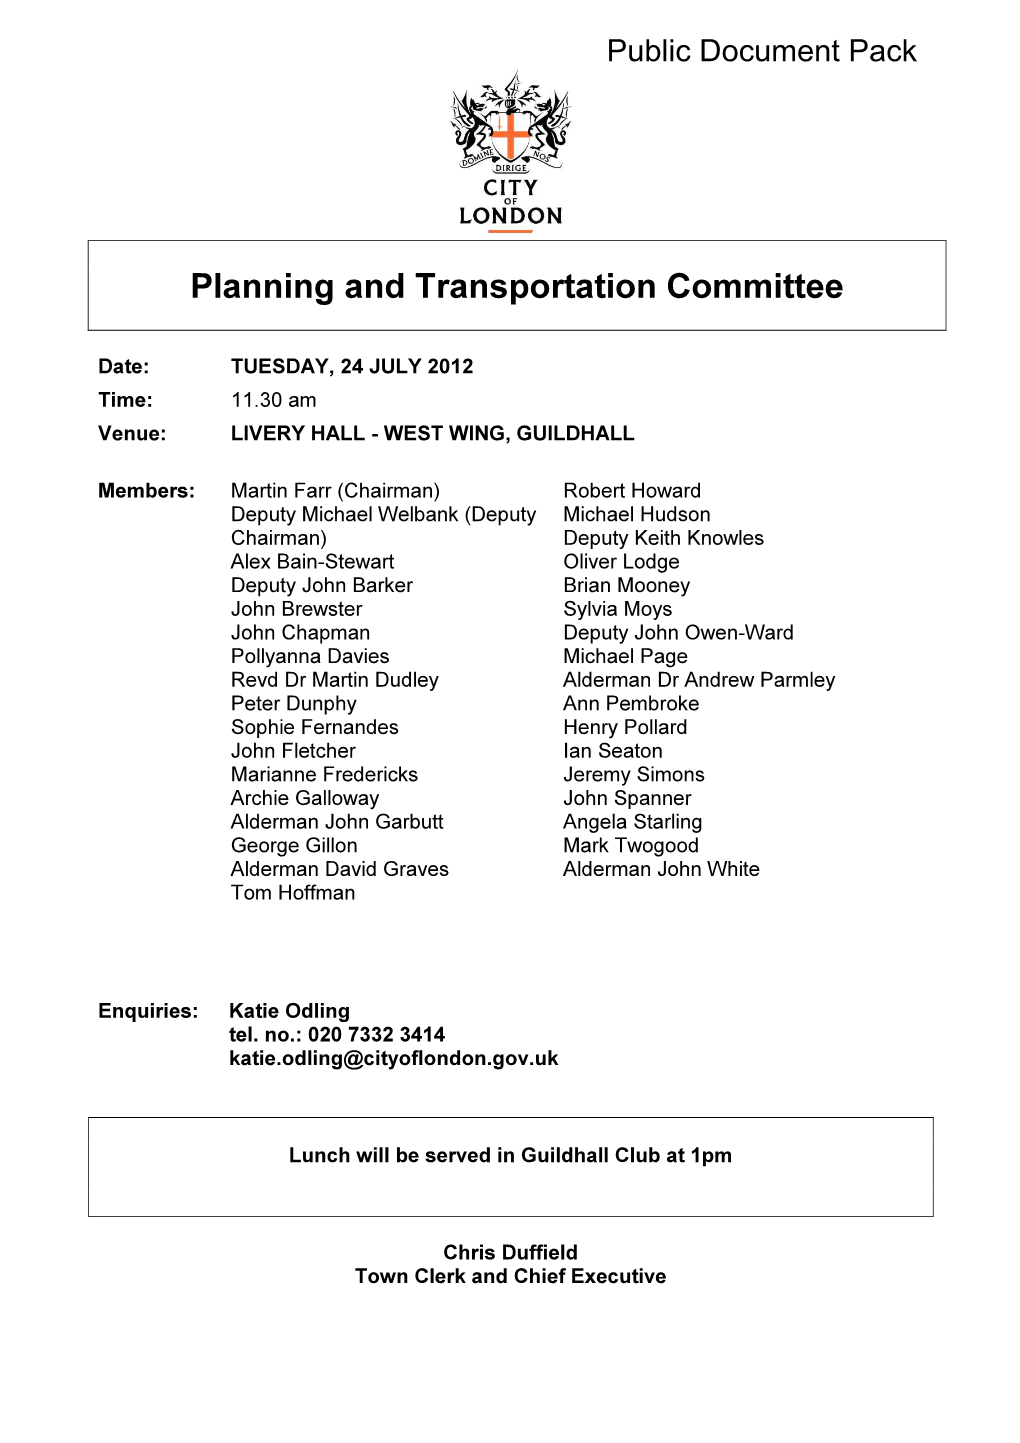 Planning and Transportation Committee